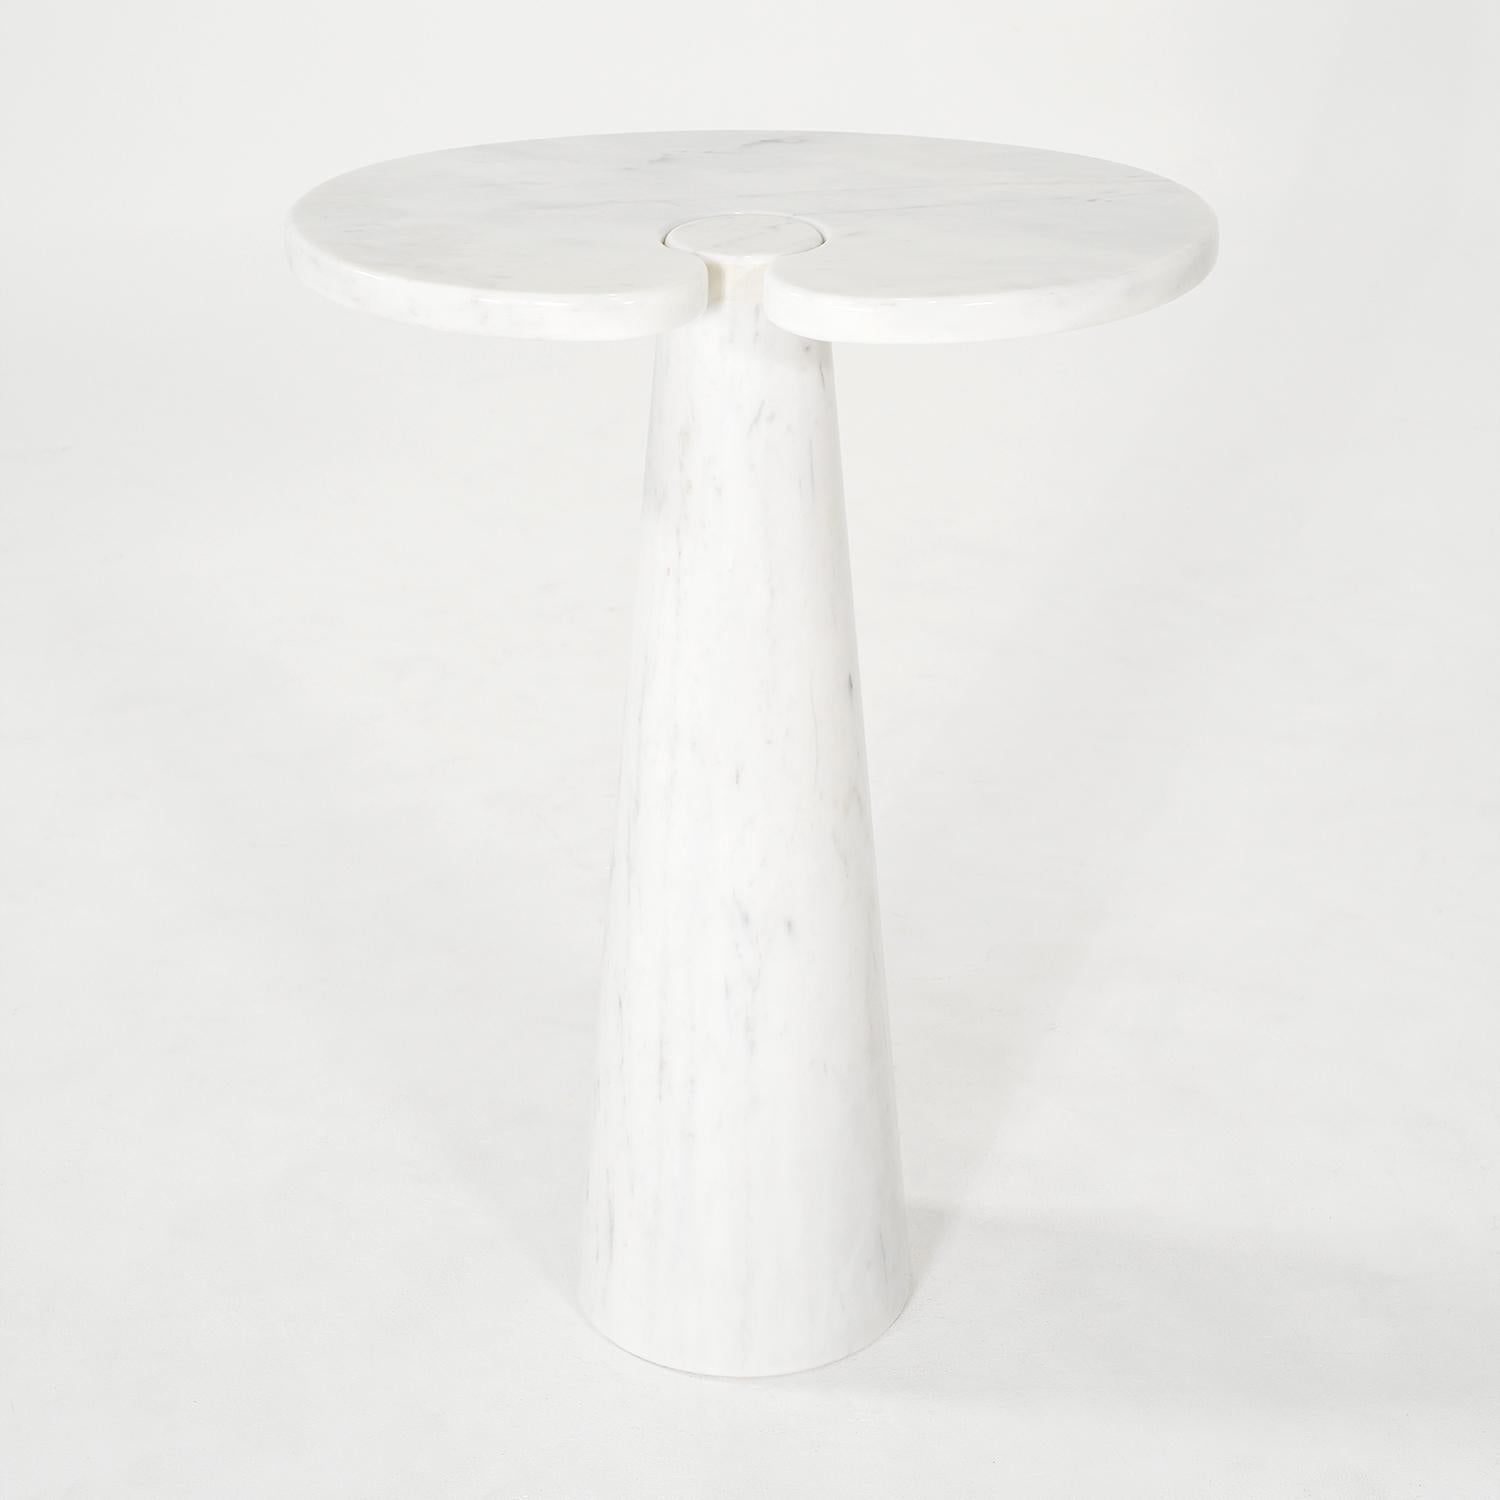 A white-grey, vintage Mid-Century modern Italian pair of freestanding side, corner tables made of hand crafted Biancone marble, designed by Angelo Mangiarotti and produced by Skipper in good condition. The half round, tall Eros end tables have no